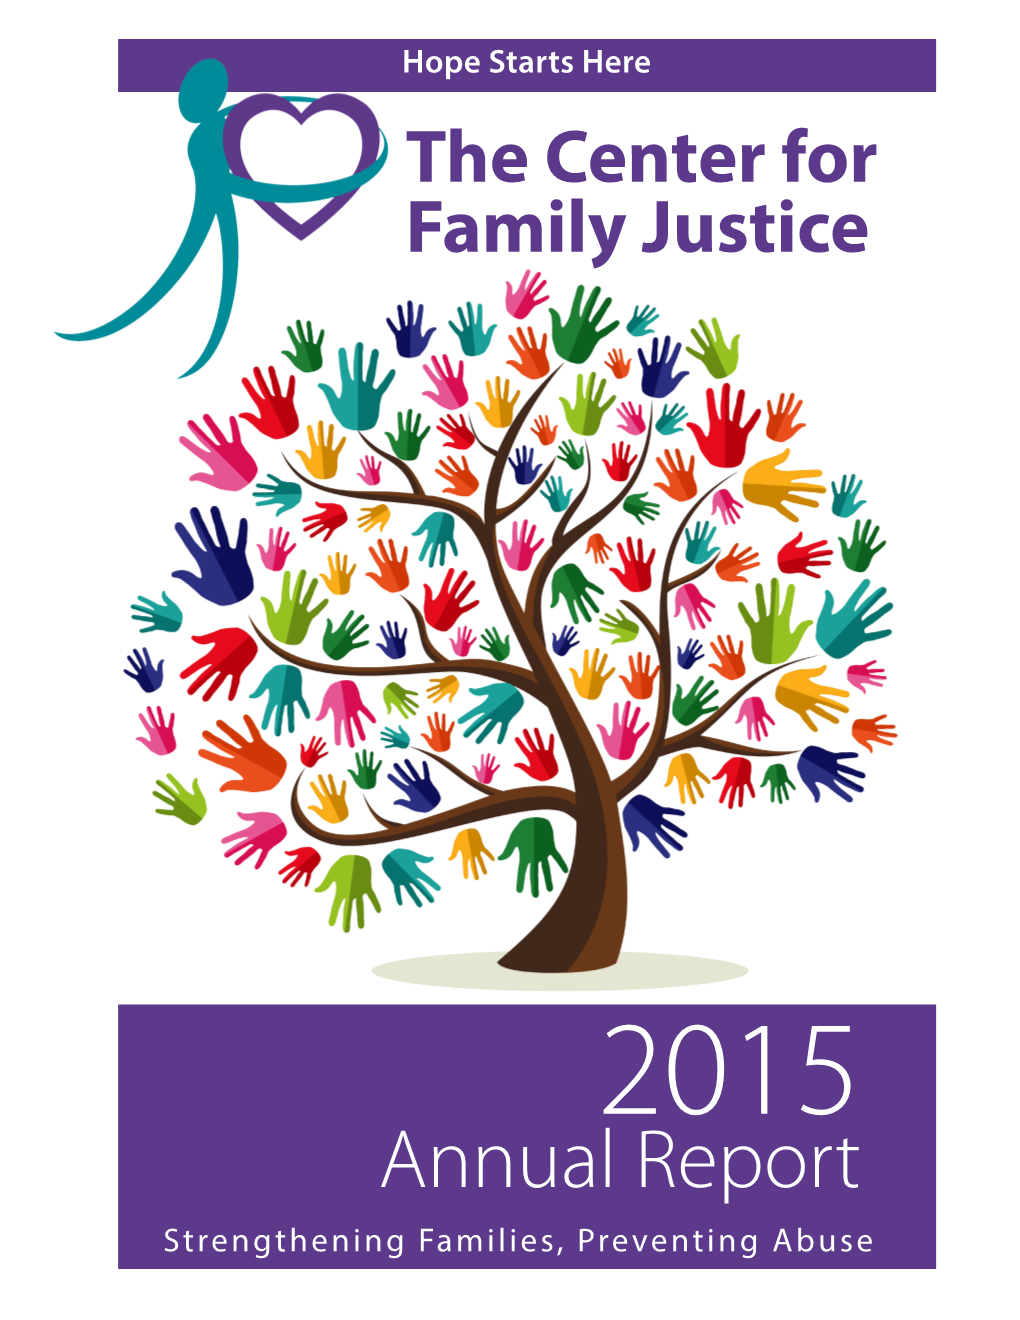 Annual Report Strengthening Families, Preventing Abuse the Center for Family Justice Hope Starts Here